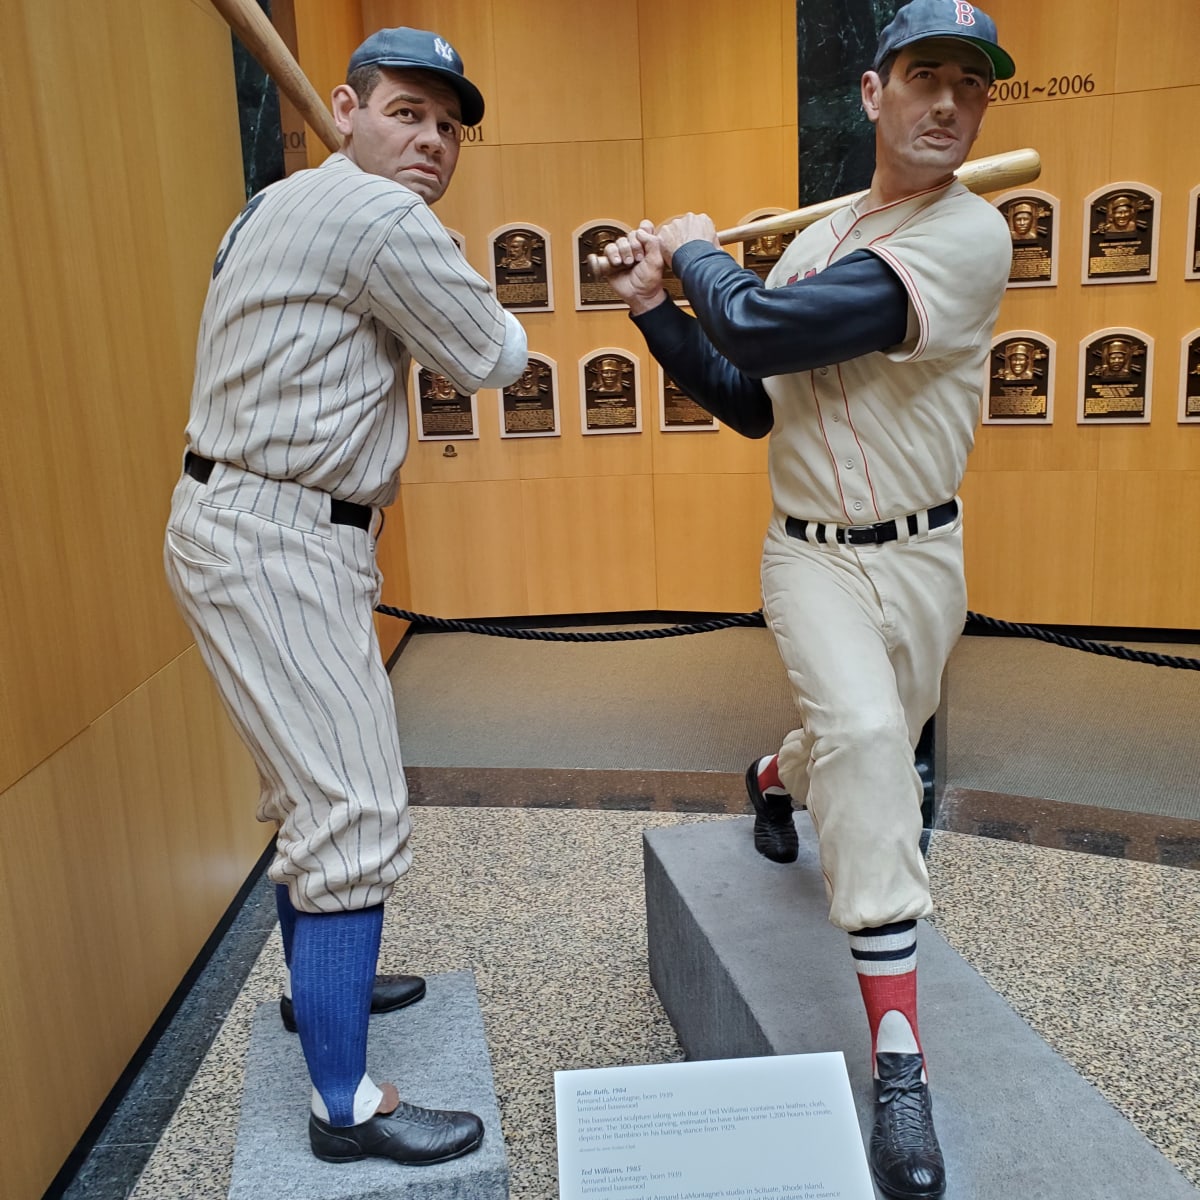 Baseball Hall of Fame induction week - All Photos 